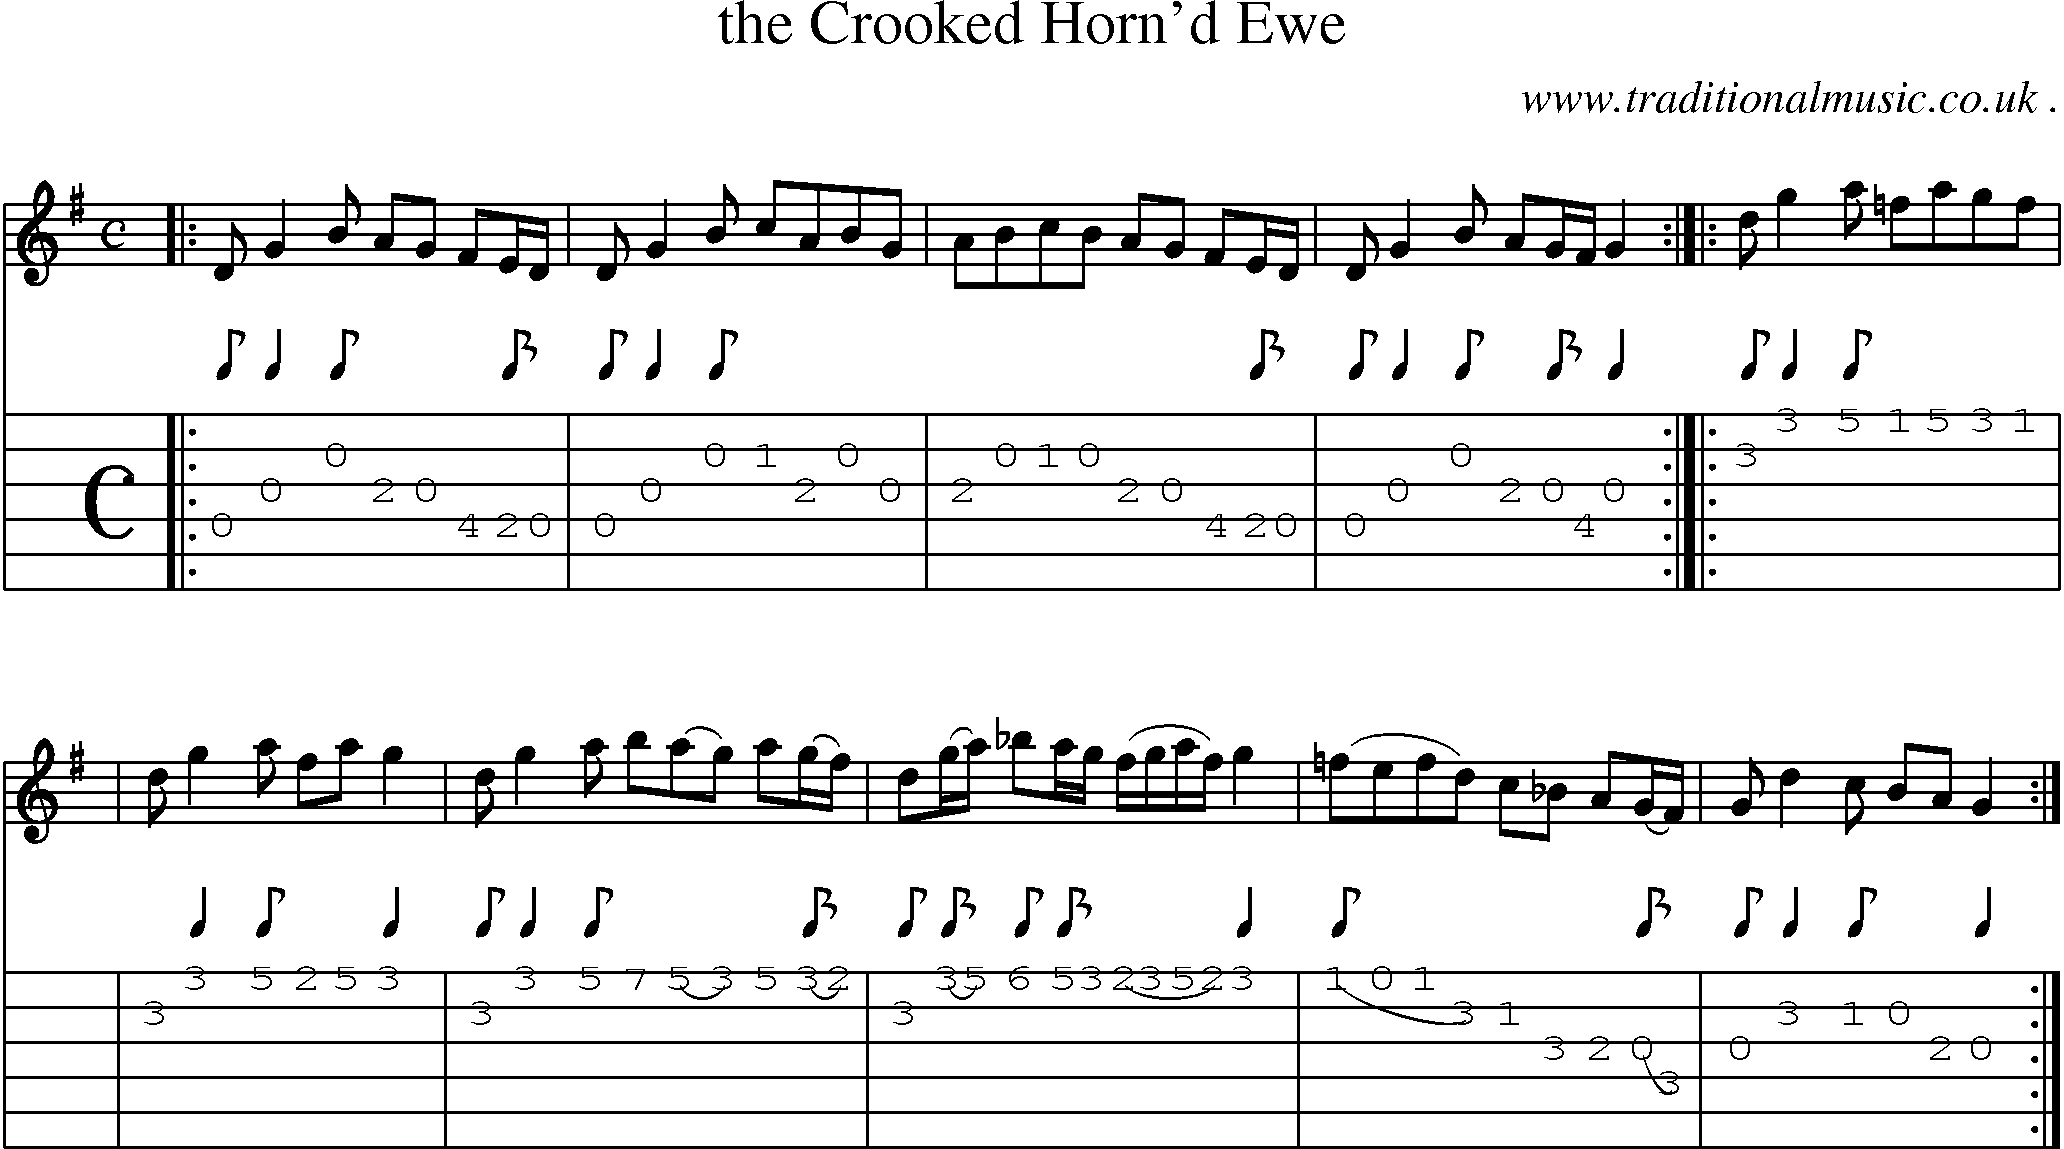 Sheet-music  score, Chords and Guitar Tabs for The Crooked Hornd Ewe